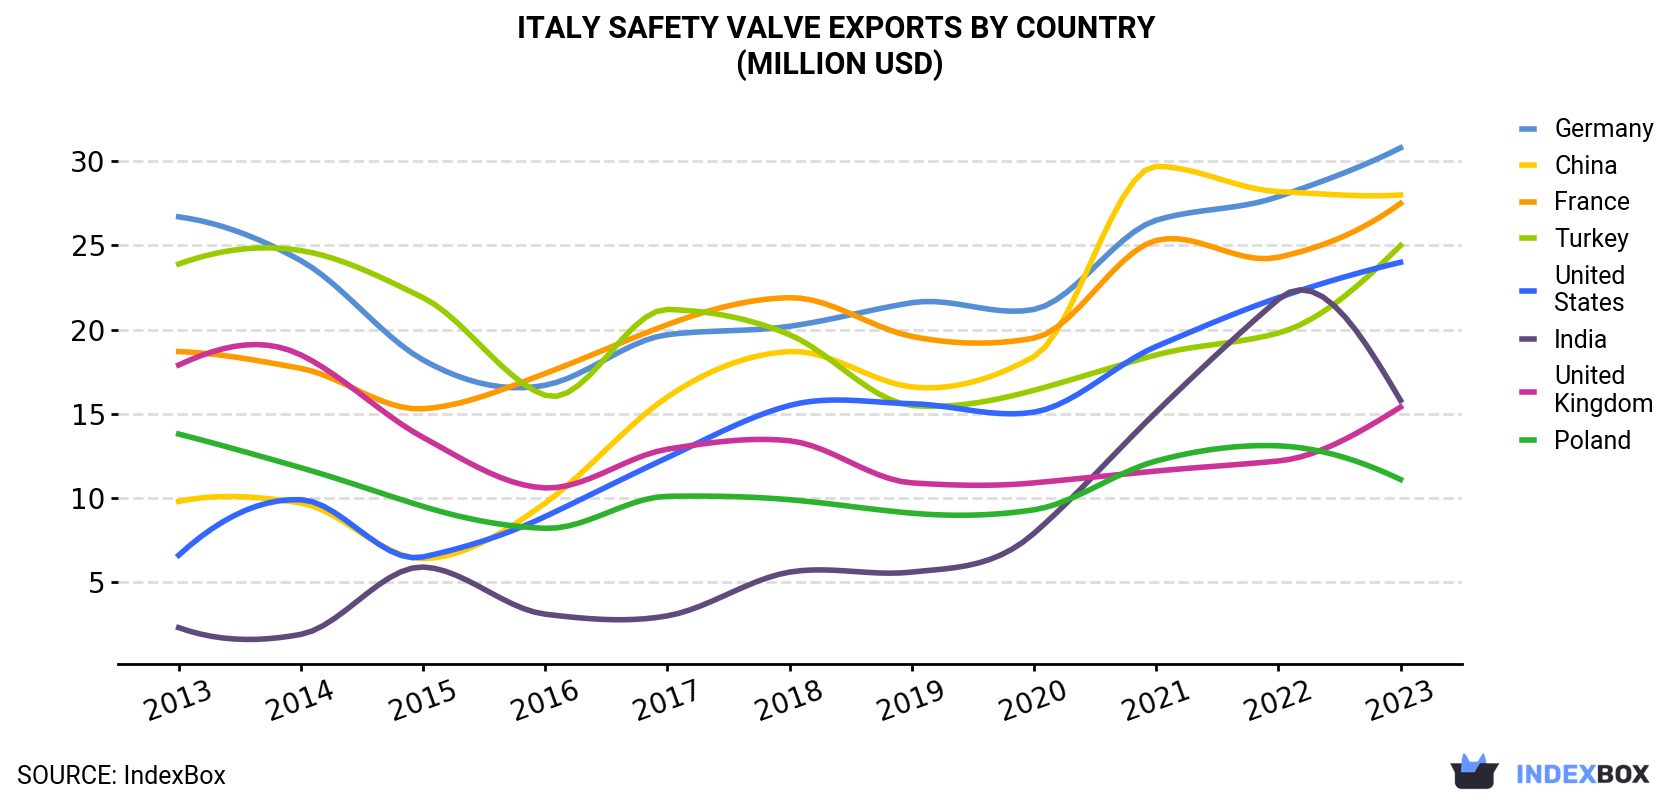 Italy Safety Valve Exports By Country (Million USD)